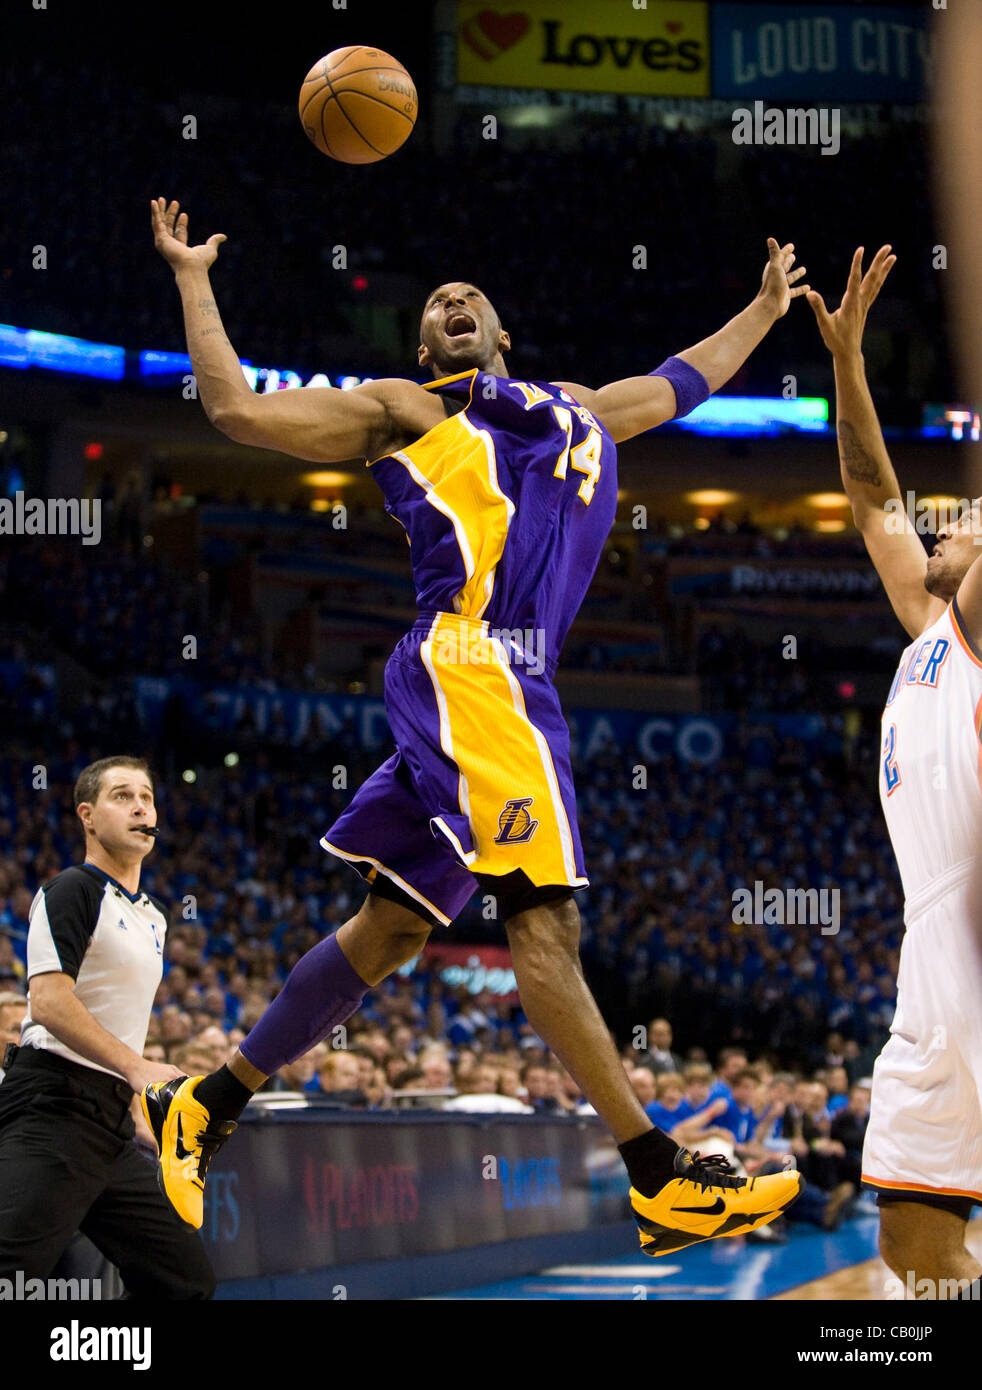 14.05.2012.  Oklahoma City, Oklahoma, U.S. - Los Angeles Lakers guard KOBE BRYANT loses the ball under pressure from THABO SEFOLOSHA of the Oklahoma City Thunder during the first half of Game 1 of the NBA Western Conference Semifinals. The Thunder won game 1 by a score of 119-90 Stock Photo